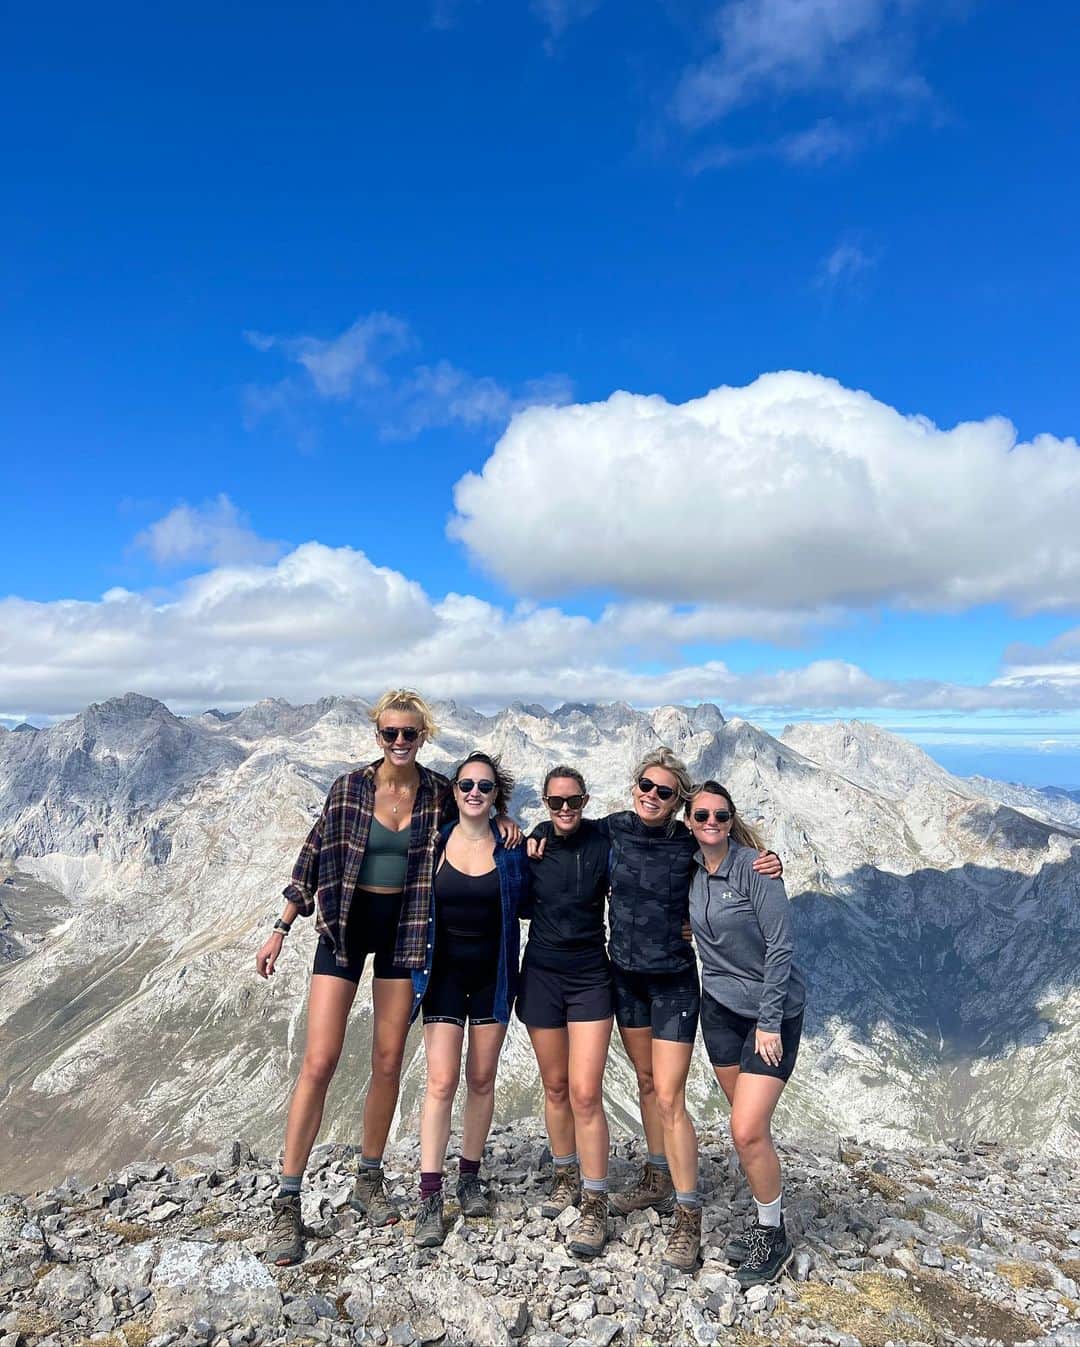 Zanna Van Dijkさんのインスタグラム写真 - (Zanna Van DijkInstagram)「Picos de Europa photo dump + TIPS 🇪🇸   Tag someone you want to visit with! 🏔️   I’ve spent the past 4 days exploring this beautiful national park in northern Spain. I hadn’t heard much about it before we went and honestly it blew me away. It’s jam packed with rugged peaks, epic trails and crystal blue rivers. Divine ✨   1️⃣ Views on the climb to Pico del Arriba. The lesser known routes are poorly marked, so ensure you download a digital GPS map to follow.  2️⃣ Pico del Jierro. Our highest summit, it was a spicy scramble up to the top and the views were INCREDIBLE.  3️⃣ Hiking in Eastern region of the park is the best way to avoid any crowds. It’s super quiet & the landscape is wild.  4️⃣ Olla de San Vicente. A perfect swim spot for a post hike dip, you can literally pull over on the side of the road and hop into the river. It’s super convenient. 5️⃣ An epic cloud inversion above Funte Dé. You can catch a cable car up into the mountains where plenty of hiking routes start. Just make sure you book tickets in advance.  6️⃣ The Puertos de Áliva hike. An easy 14km route with non-stop views. Perfect for a day when your legs are tired. 7️⃣ Ruta del Cares. One of the most popular hikes in Picos de Europa and it’s easy to see why! It’s a moderate hike with phenomenal scenery. Just make sure you arrive super early to secure a parking spot.  8️⃣ The Ruta del Cares weaves through a gorge, with the path often being built into the mountain walls or passing through tunnels.  9️⃣ There’s SO many friendly goats in the mountains. Plus horses, cows and donkeys. It’s honestly animal heaven!  🔟 Potes. The most quaint mountain town. The architecture is gorgeous and there’s even a river you can take a dip in.   I will share a complete travel guide to Picos de Europa on my website soon 🥾 Shoutout to @moonhoneytravelers for inspiring this trip 🫶🏼 #picosdeeuropa #asturias #picosdeeuropanationalpark #asturiasgram #cantabria」8月21日 17時34分 - zannavandijk